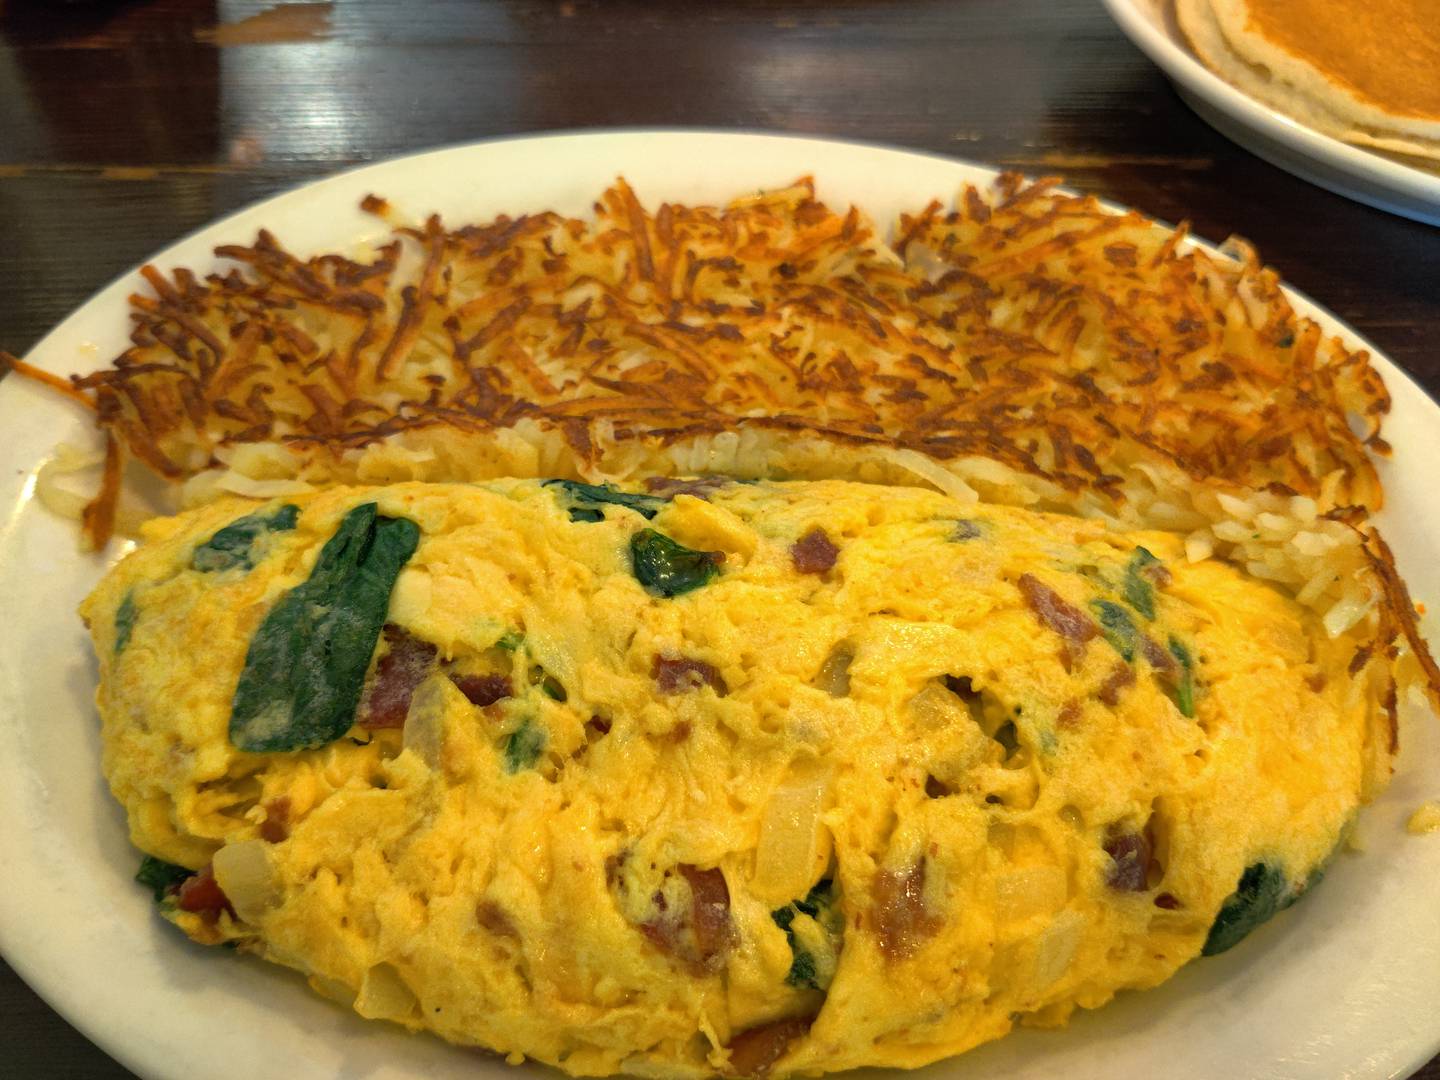 The Florentine omelet at Honey Berry Pancakes and Cafe in South Elgin.